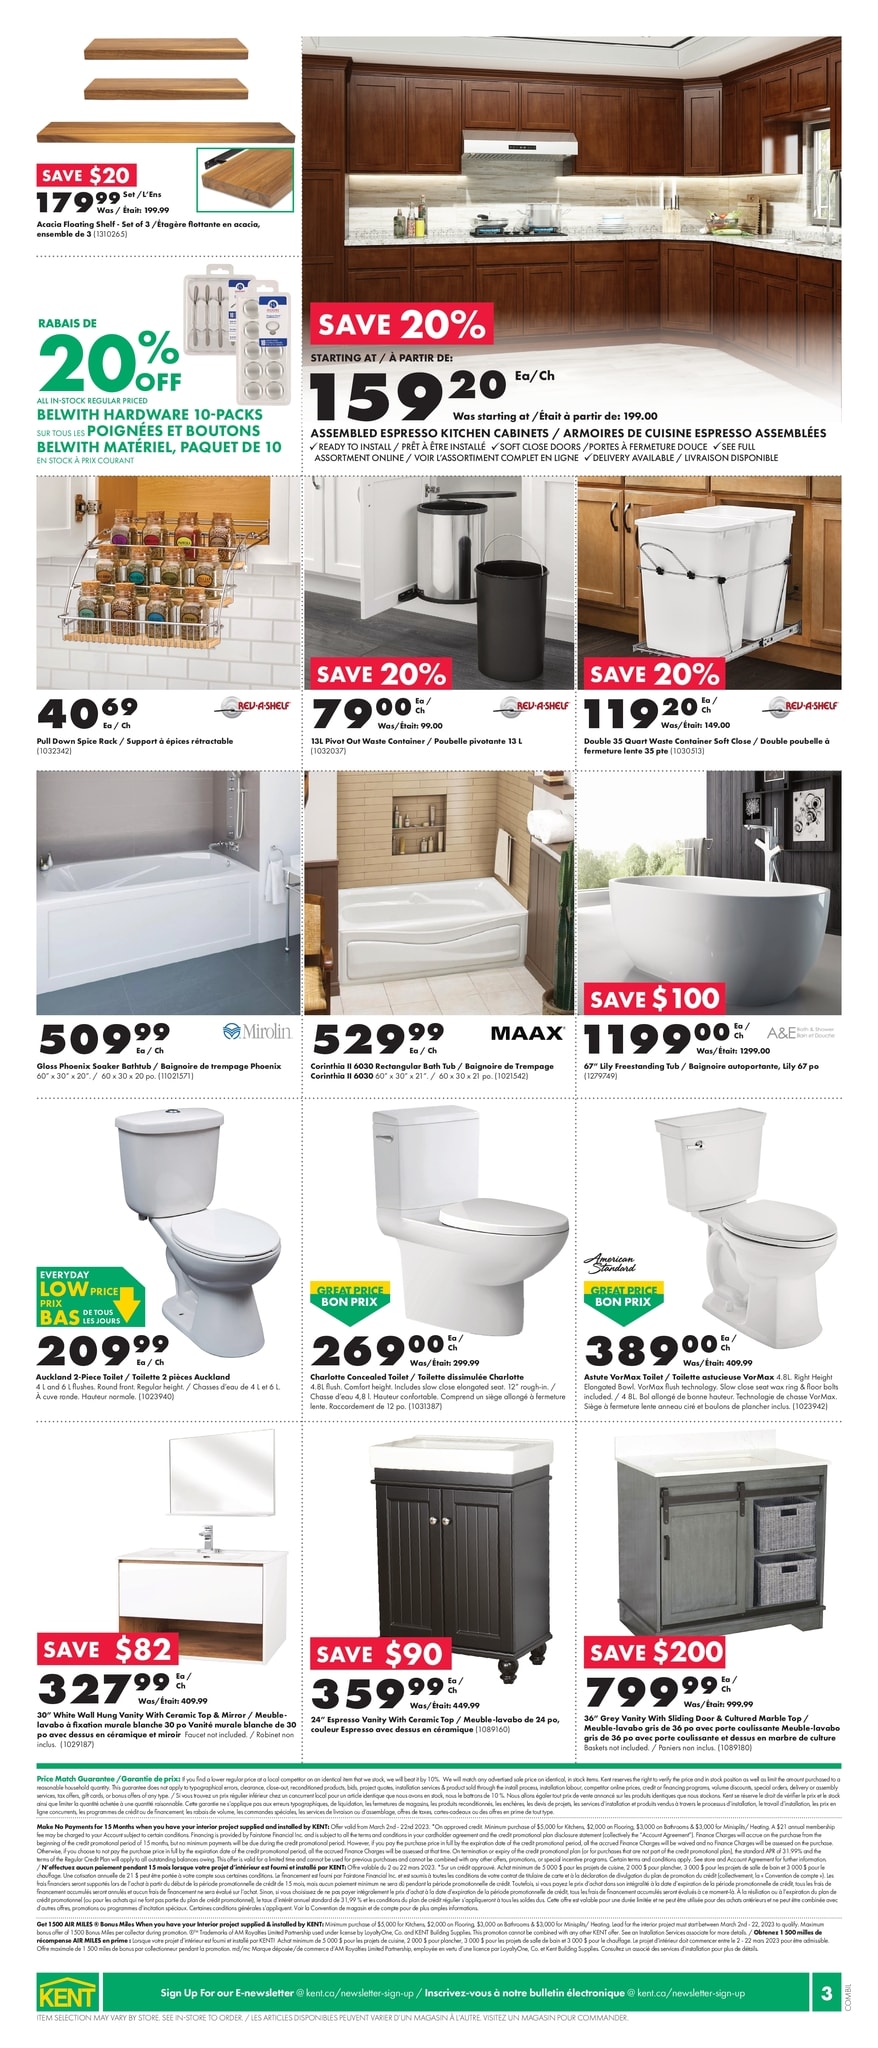 Kent - Weekly Flyer Specials - Page 3